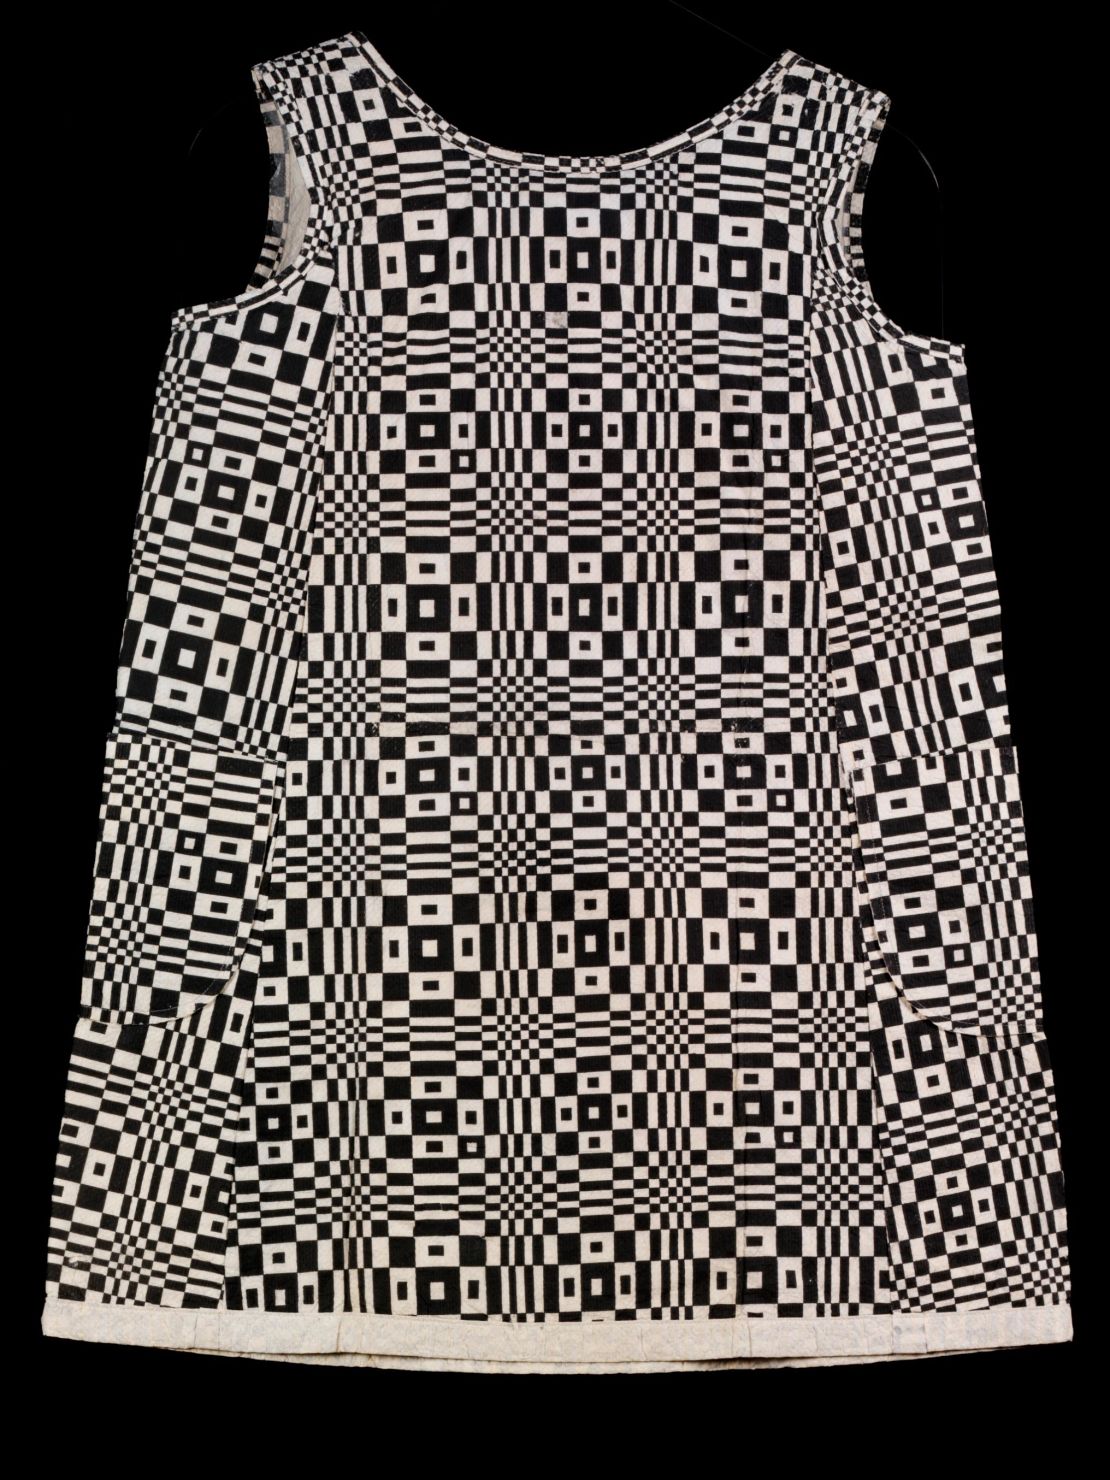 A paper dress from 1966, designed to be disposed after use.